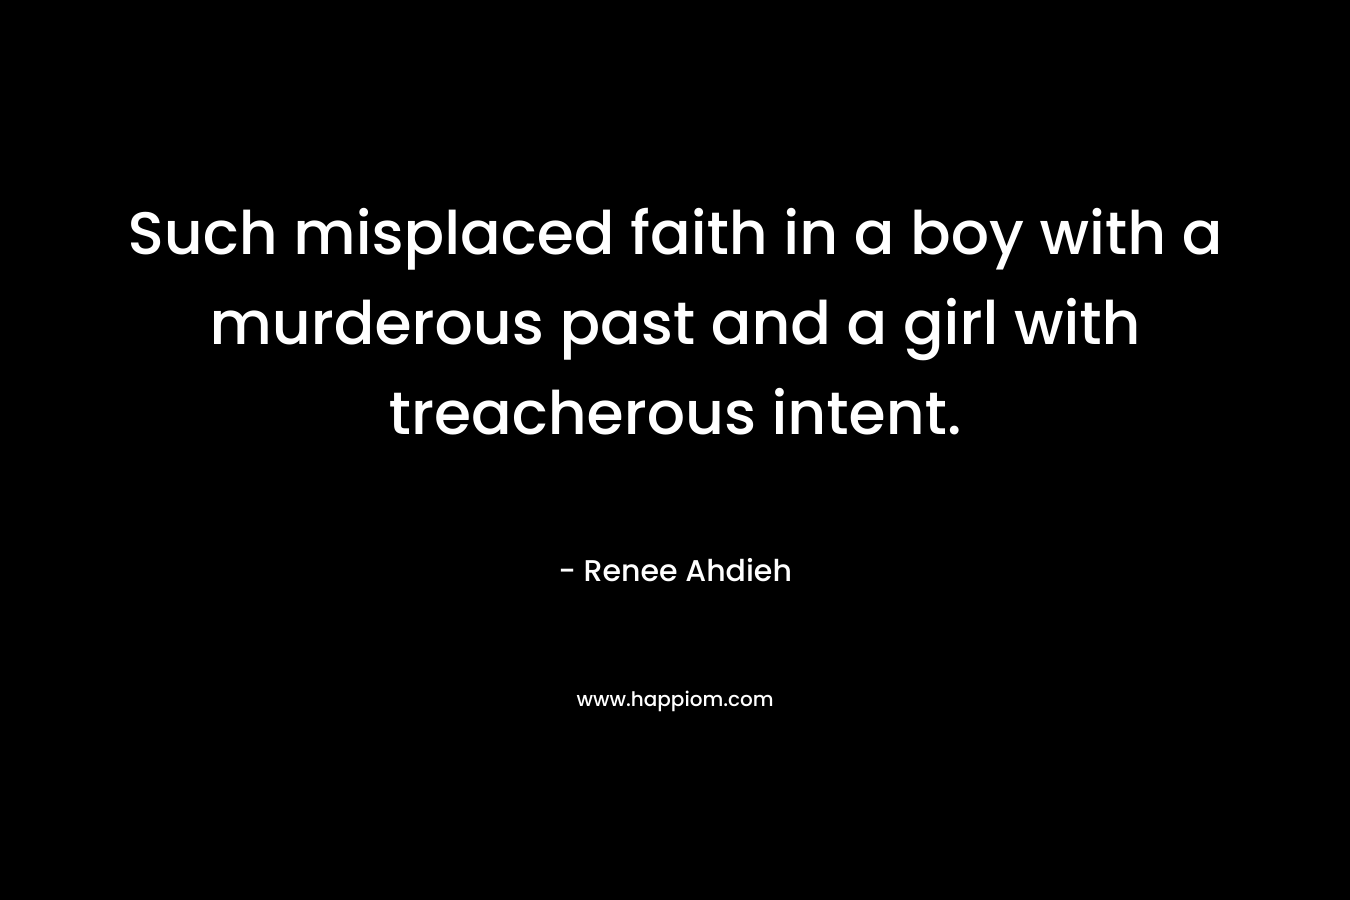 Such misplaced faith in a boy with a murderous past and a girl with treacherous intent. – Renee Ahdieh